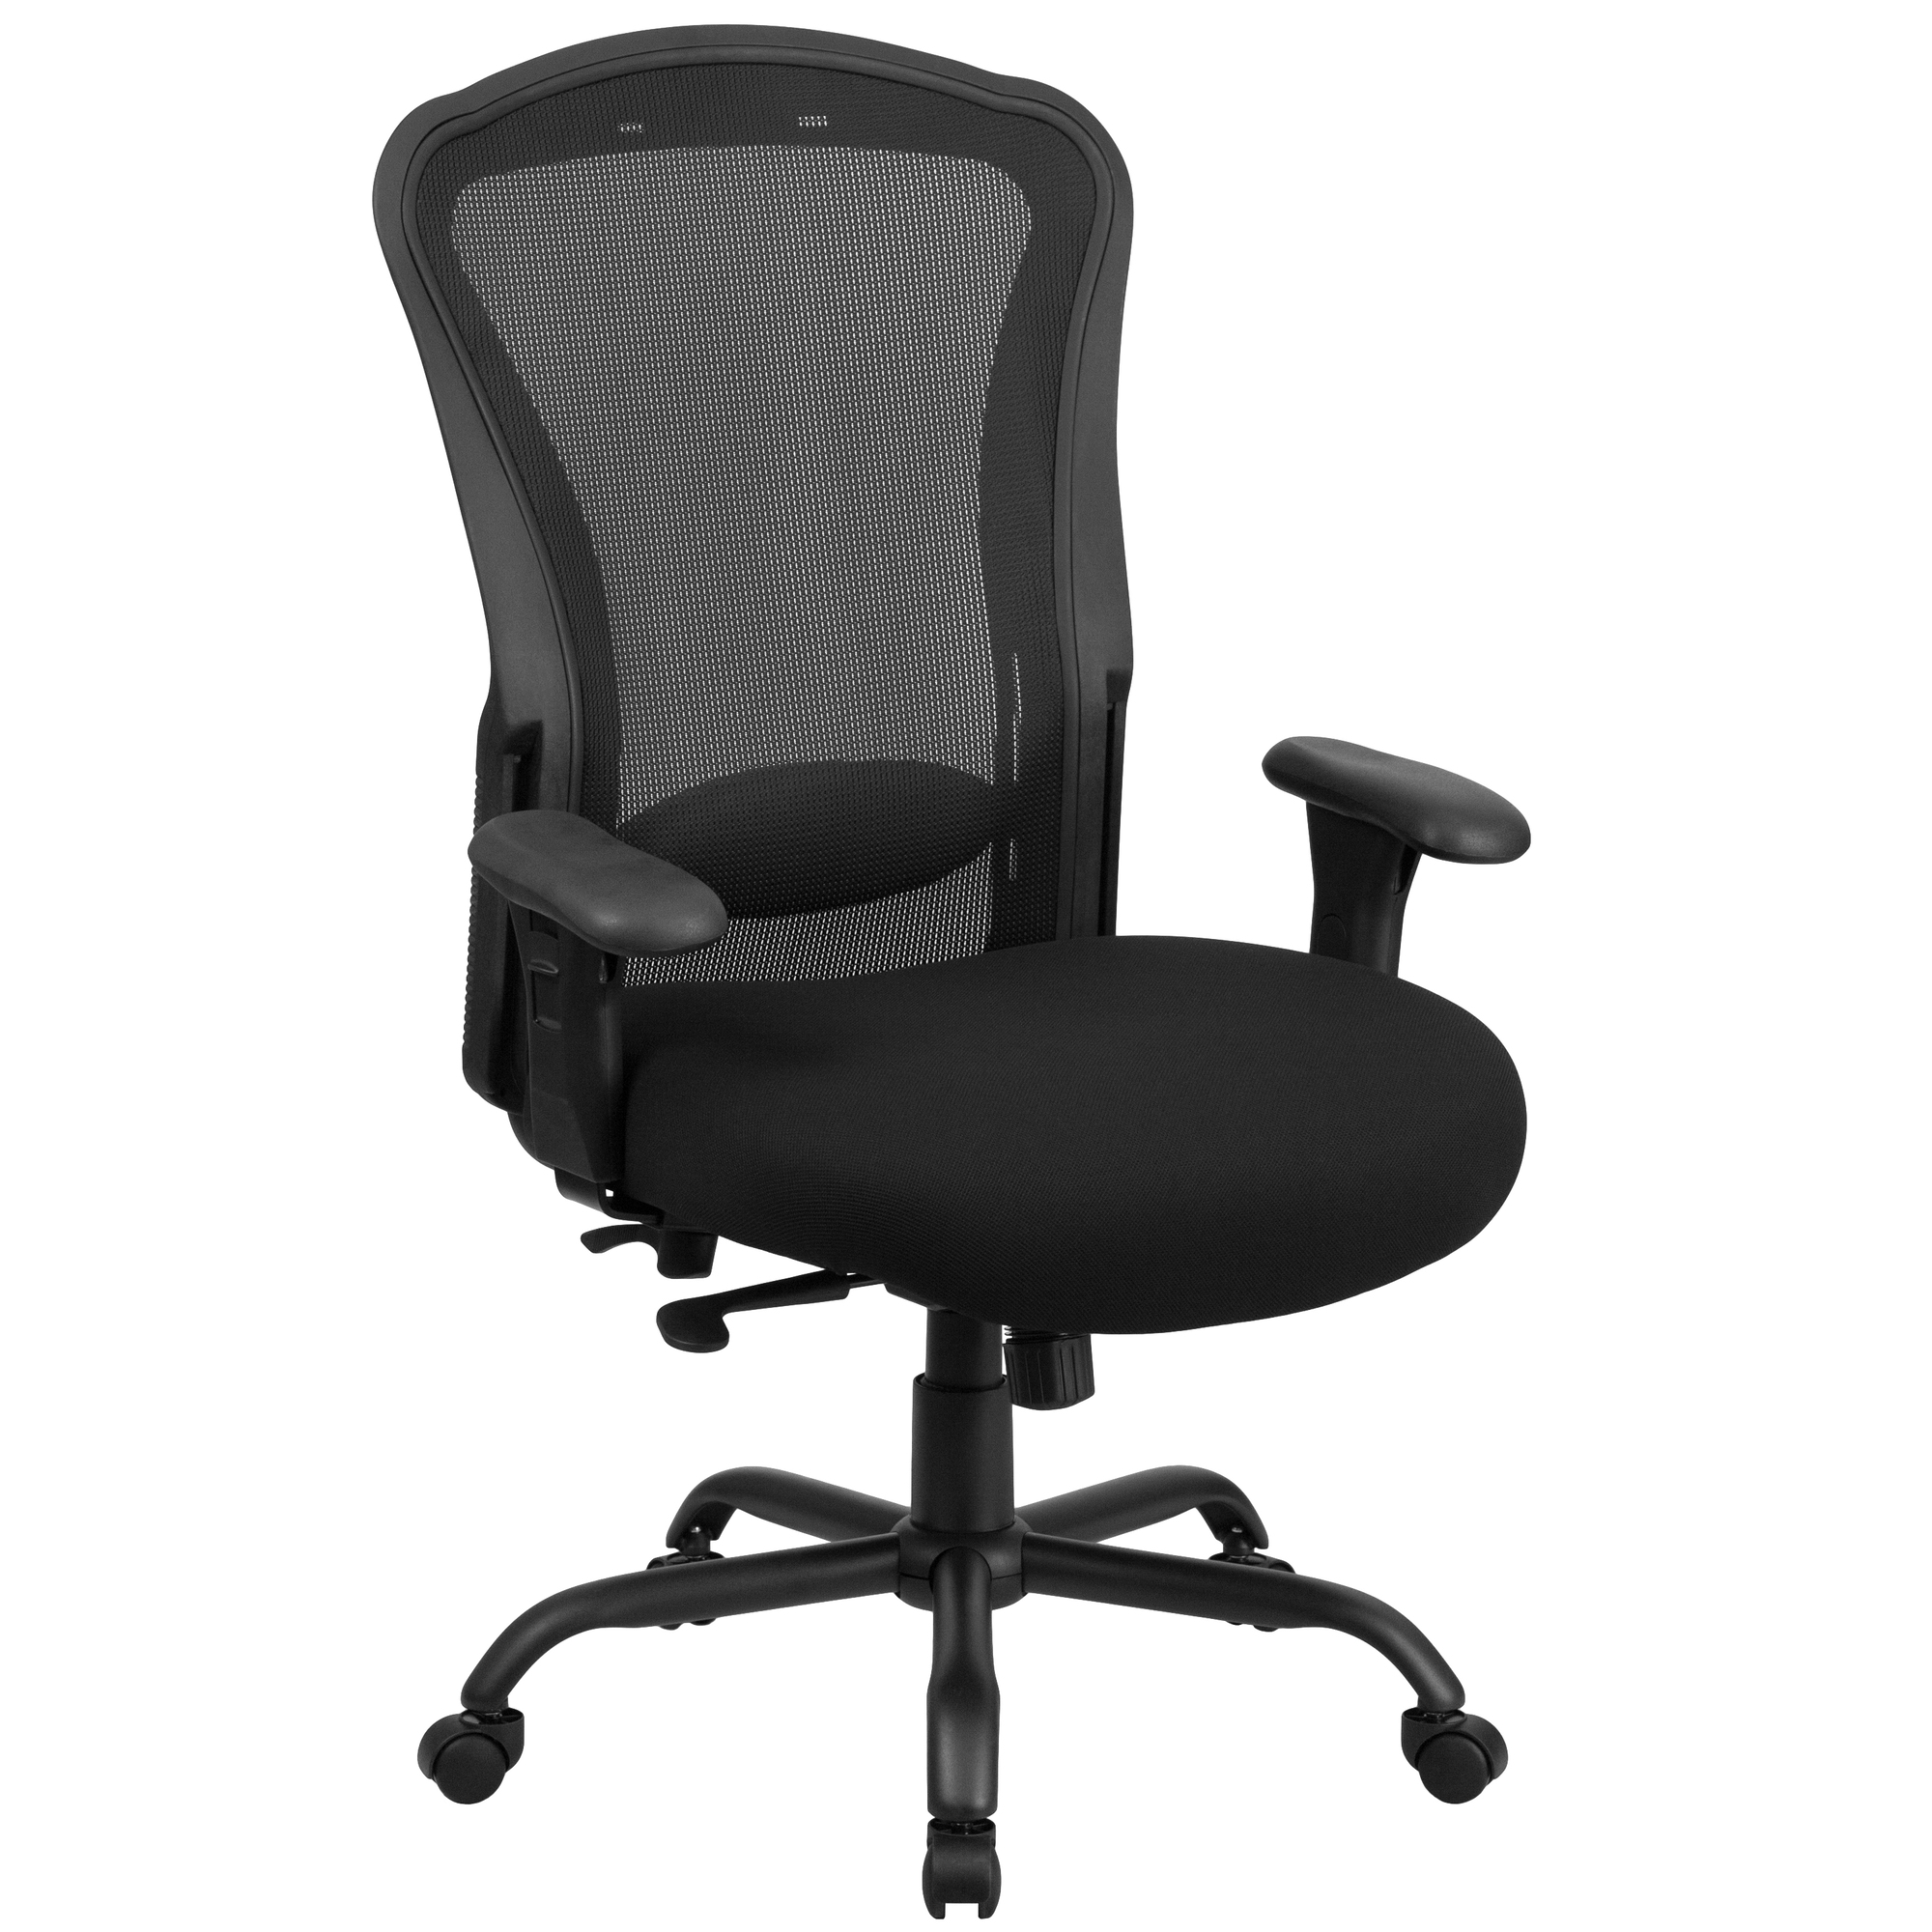 Flash Furniture, 24/7 400 lb. Rated Black Mesh Multifunction Chair, Primary Color Black, Included (qty.) 1, Model LQ3BK